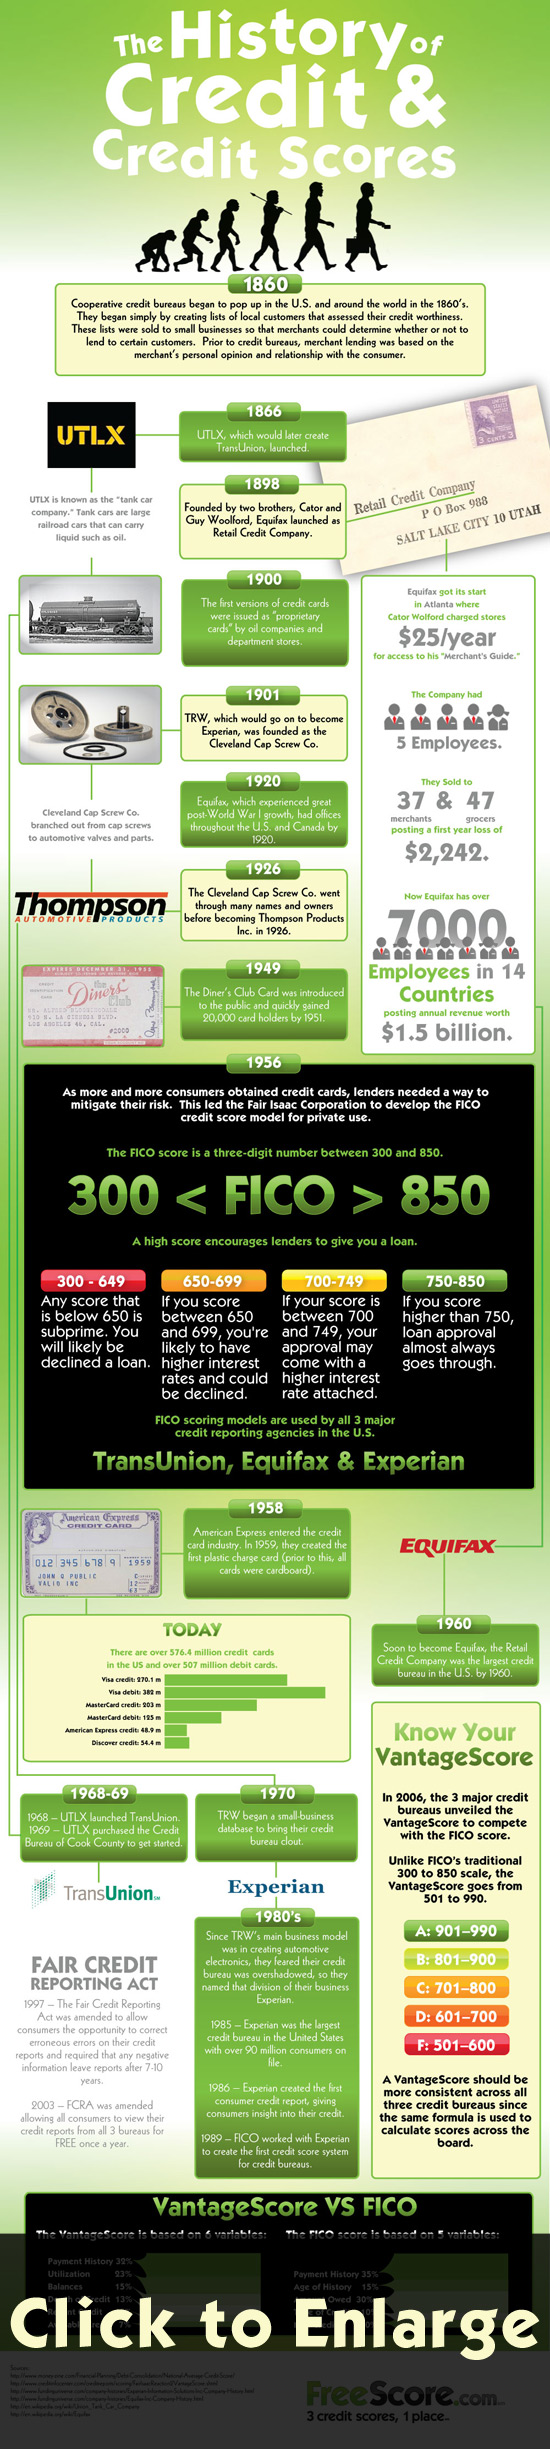 The History of Credit & Credit Scores